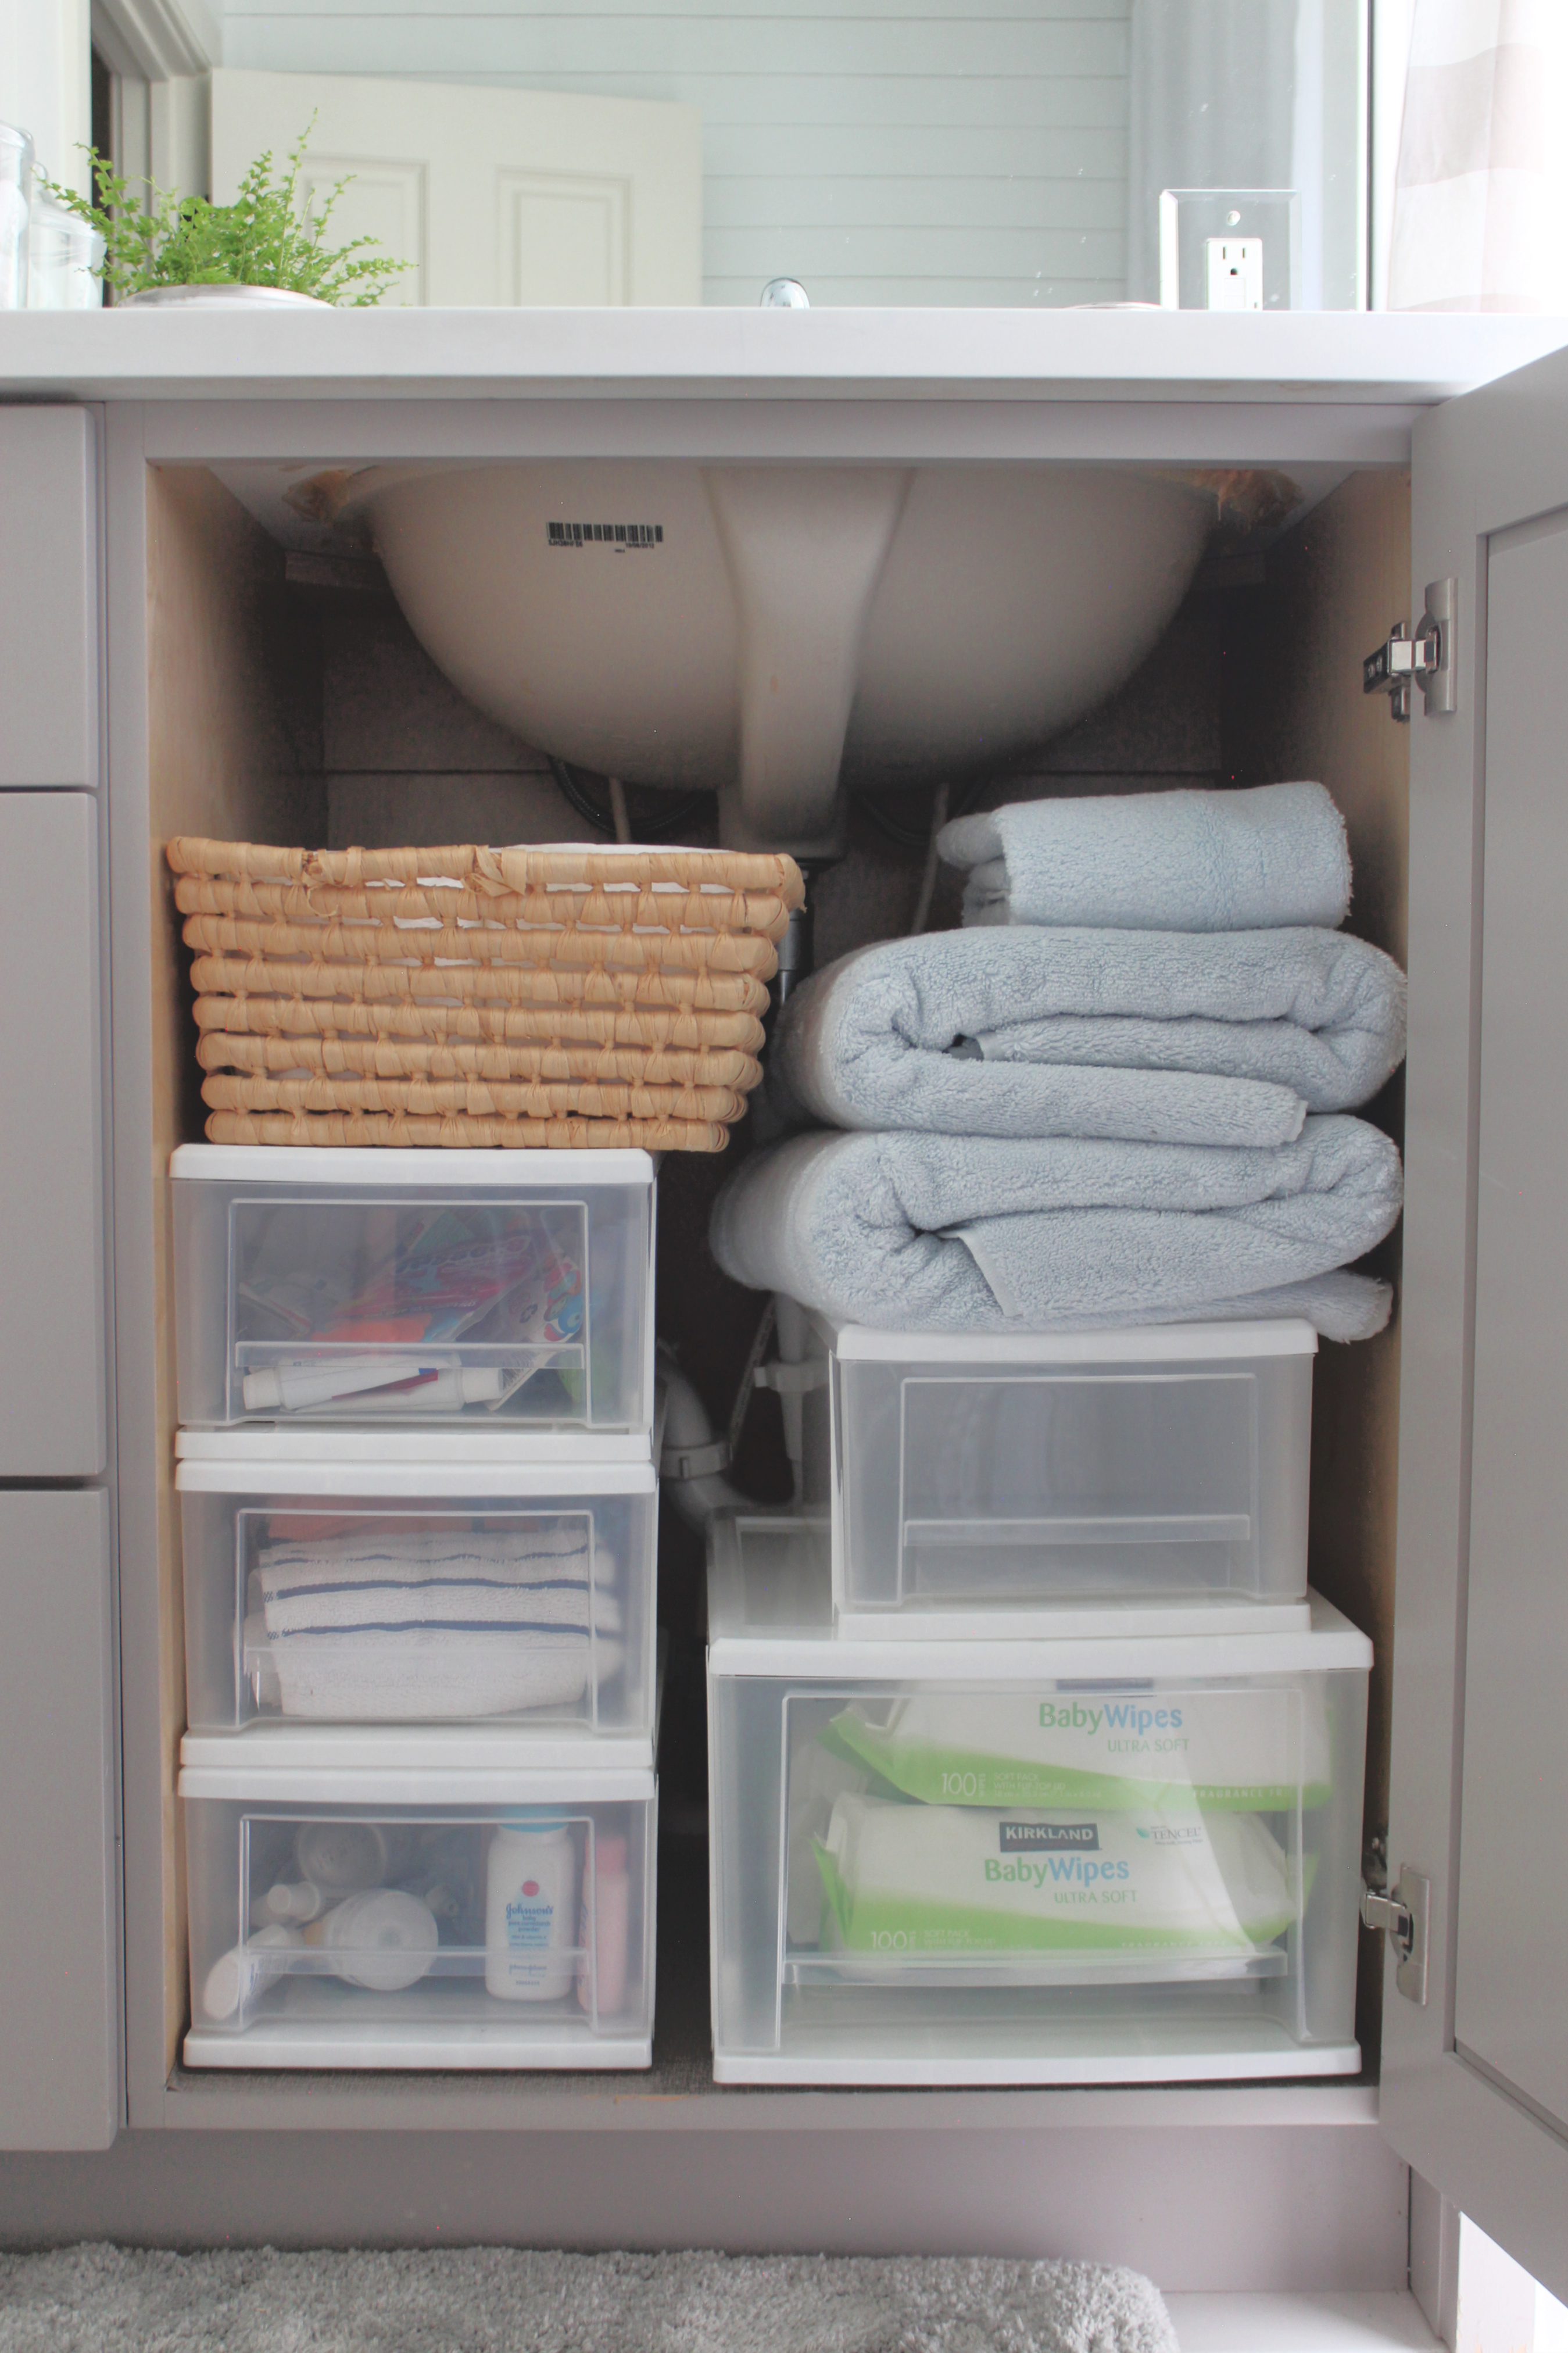 19 Clever Ways to Organize Bathroom Cabinets